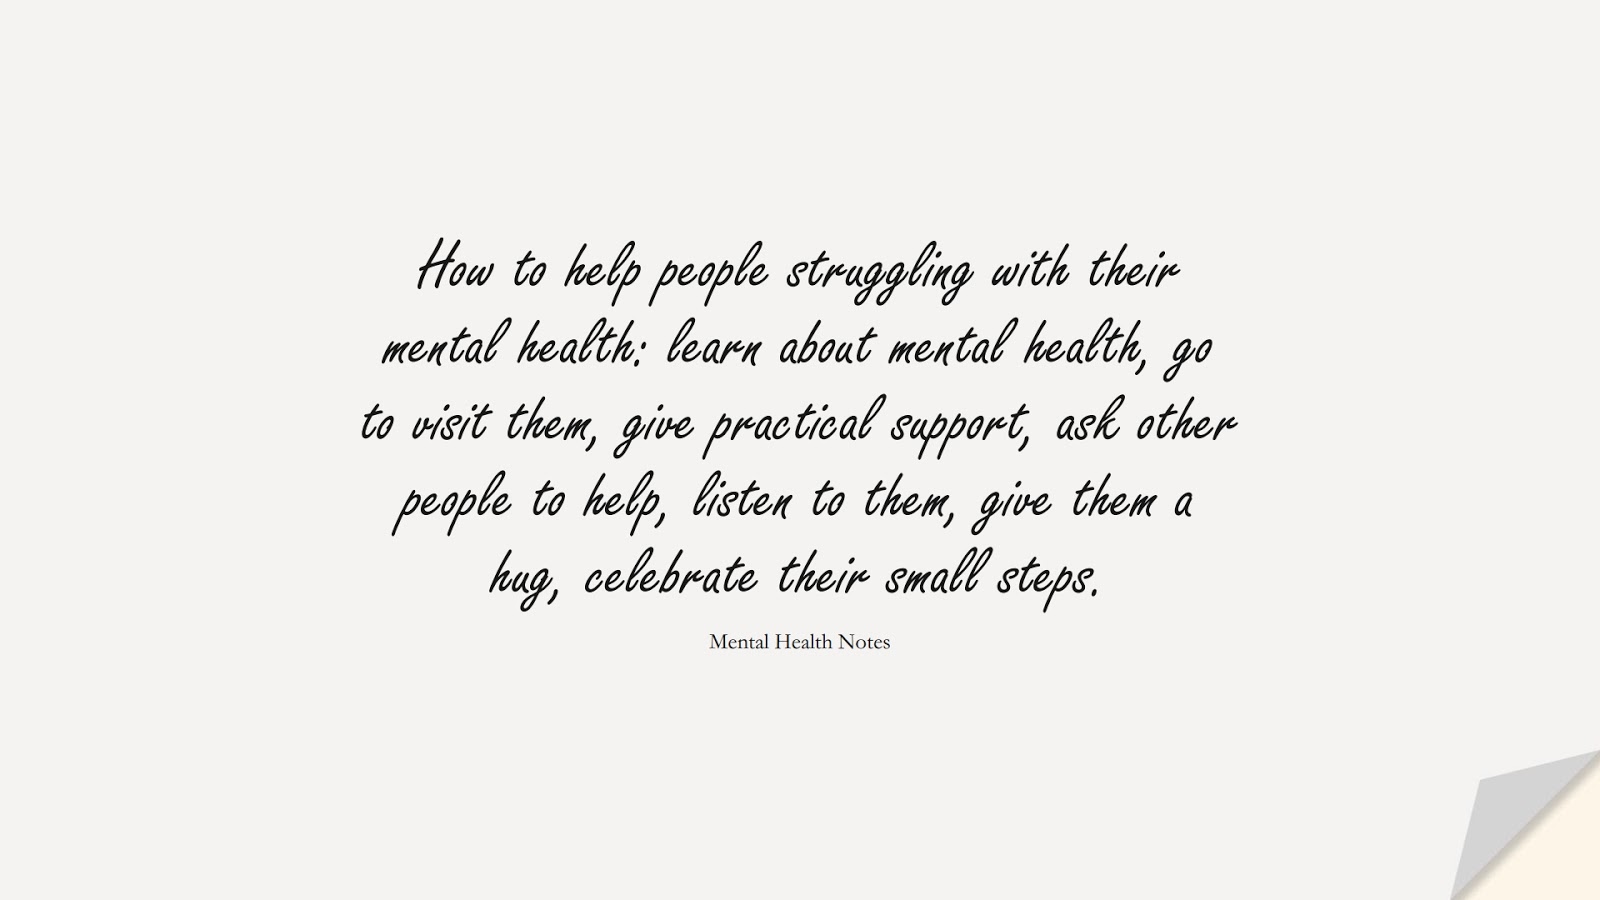 How to help people struggling with their mental health: learn about mental health, go to visit them, give practical support, ask other people to help, listen to them, give them a hug, celebrate their small steps. (Mental Health Notes);  #DepressionQuotes